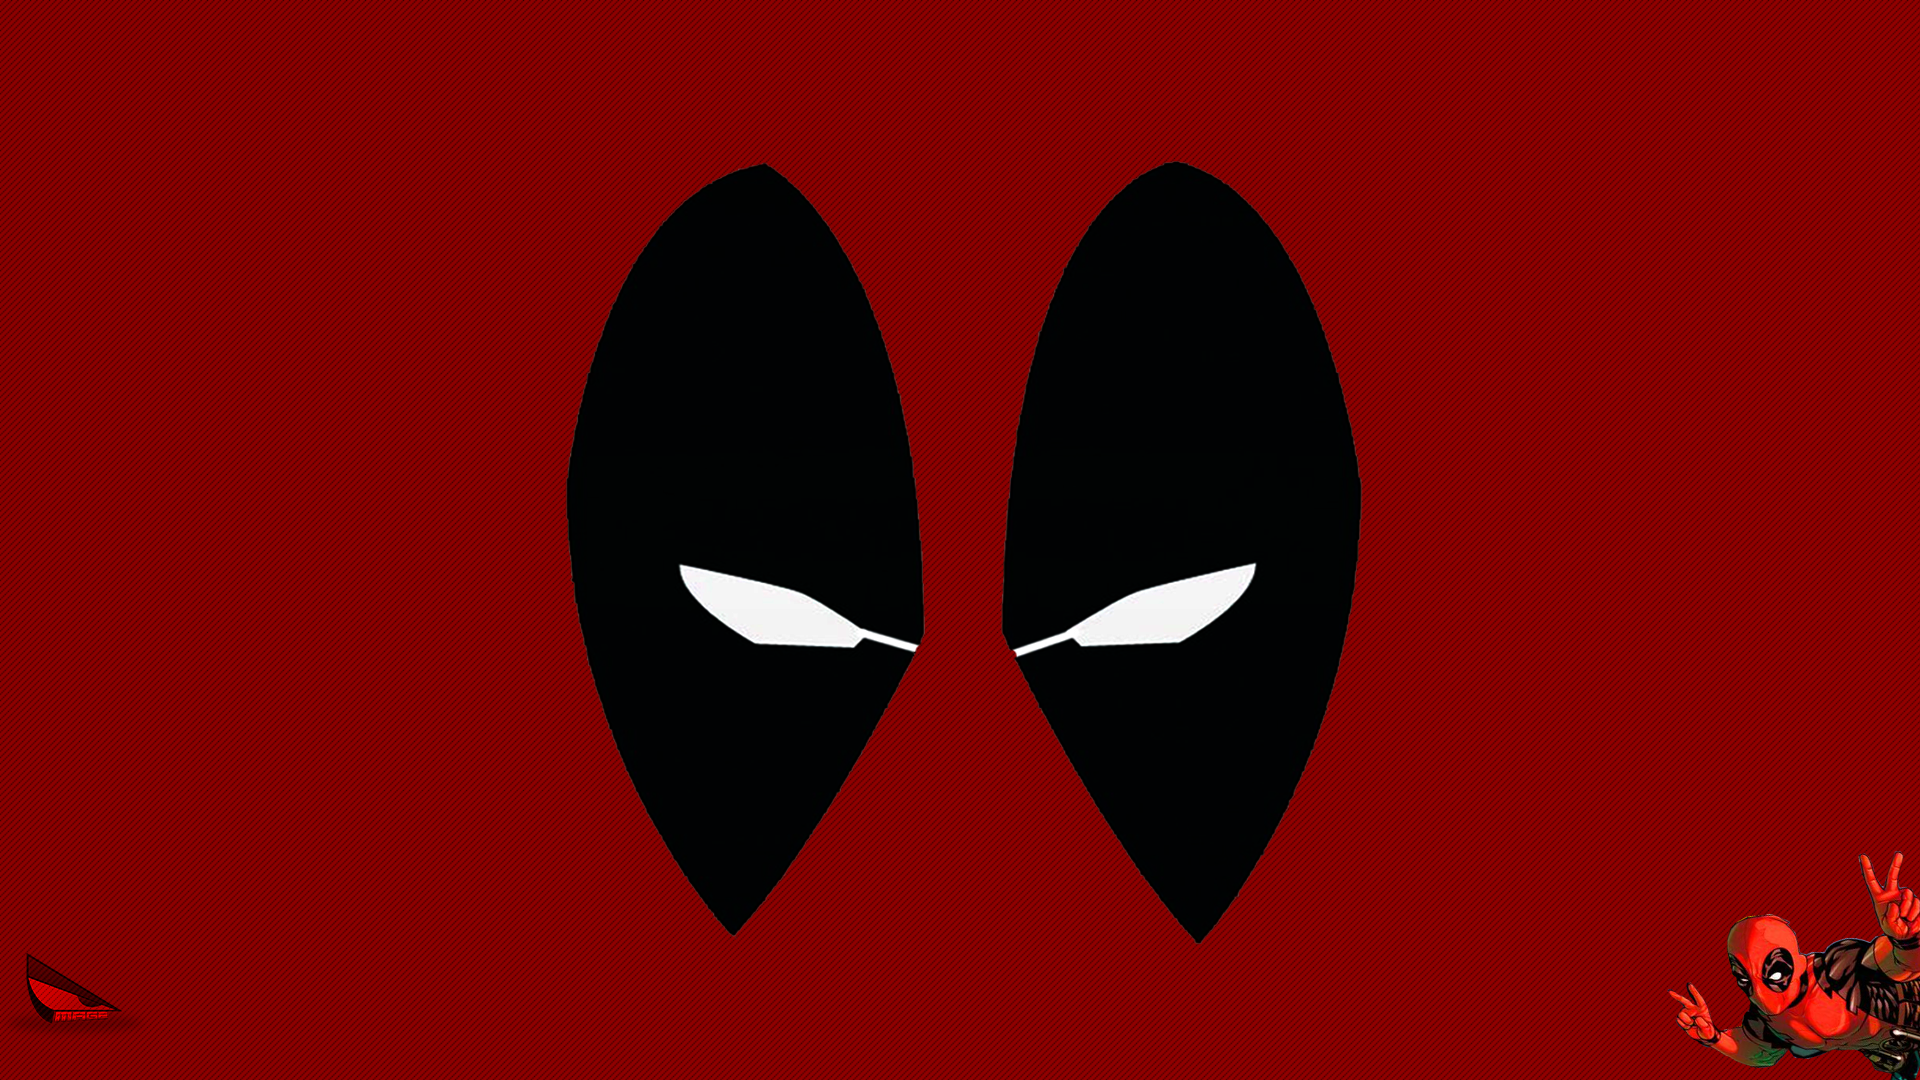 Deadpool Deadpool Corps Merc With A Mouth Marvel Heroes Marvel Comics Wade Wilson Heroes Generals Re 1920x1080